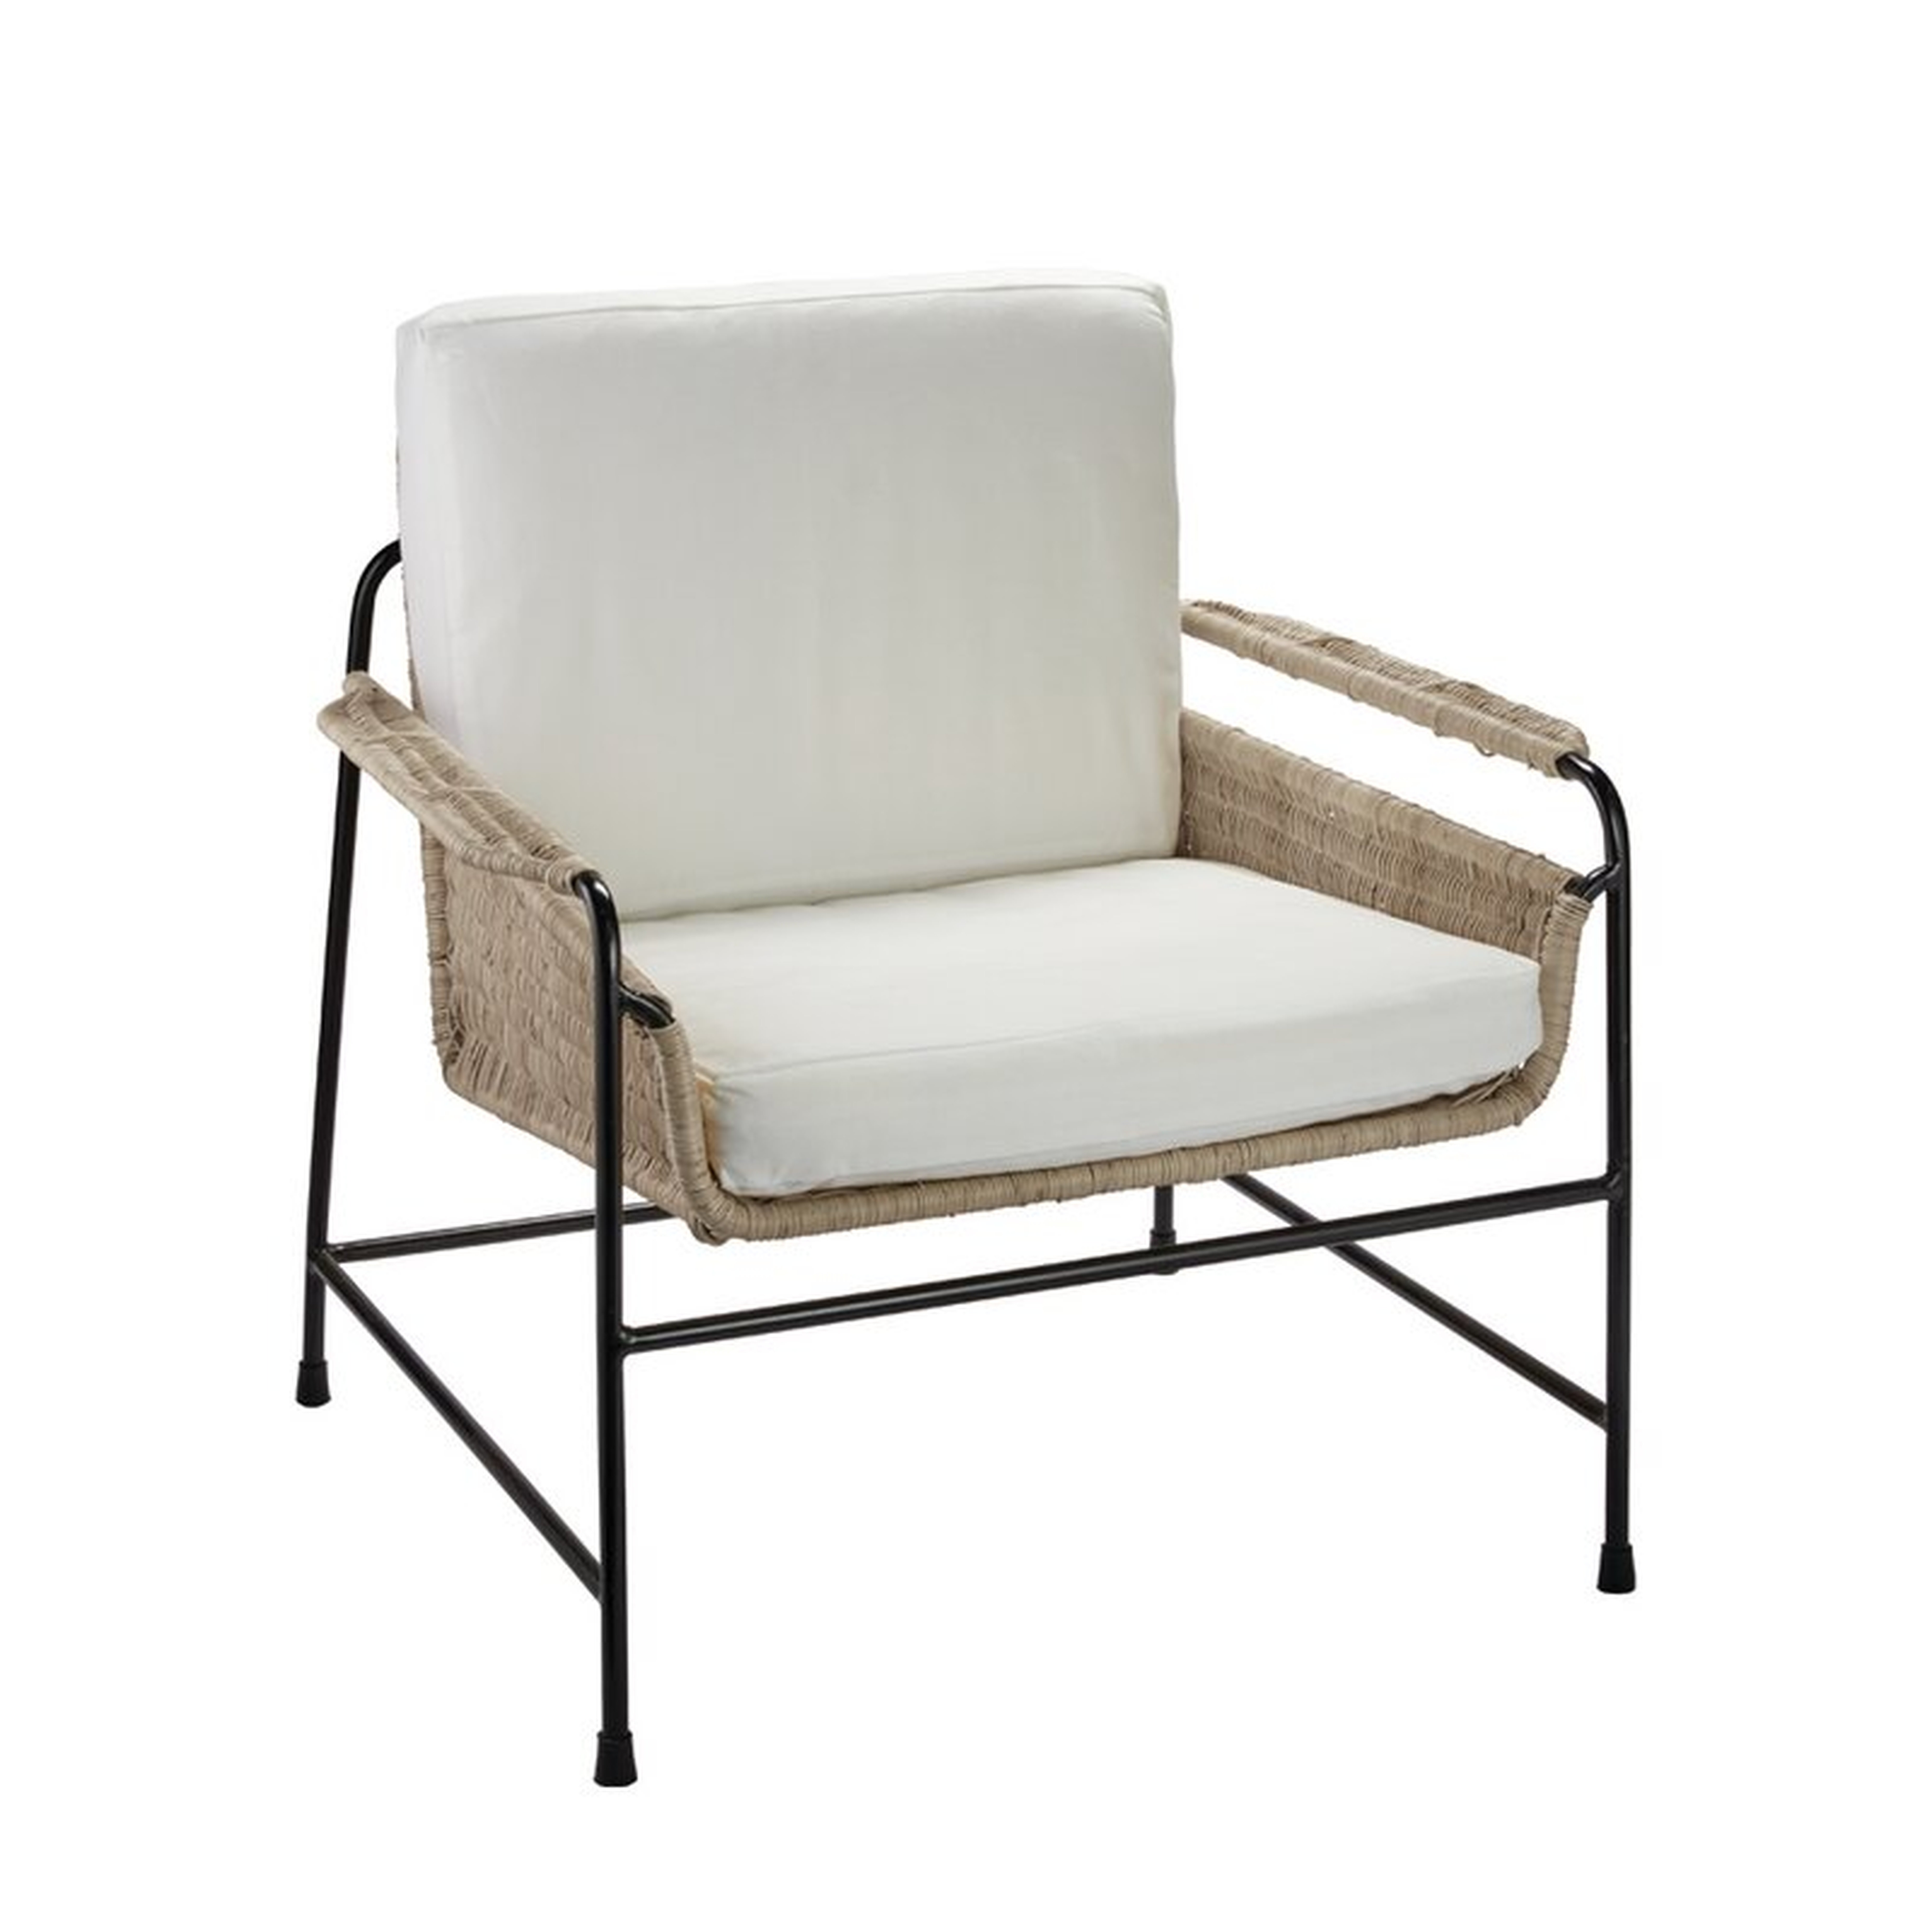 Palermo Lounge Chair In Natural Rattan & Black Steel With Off White Cushions - Perigold